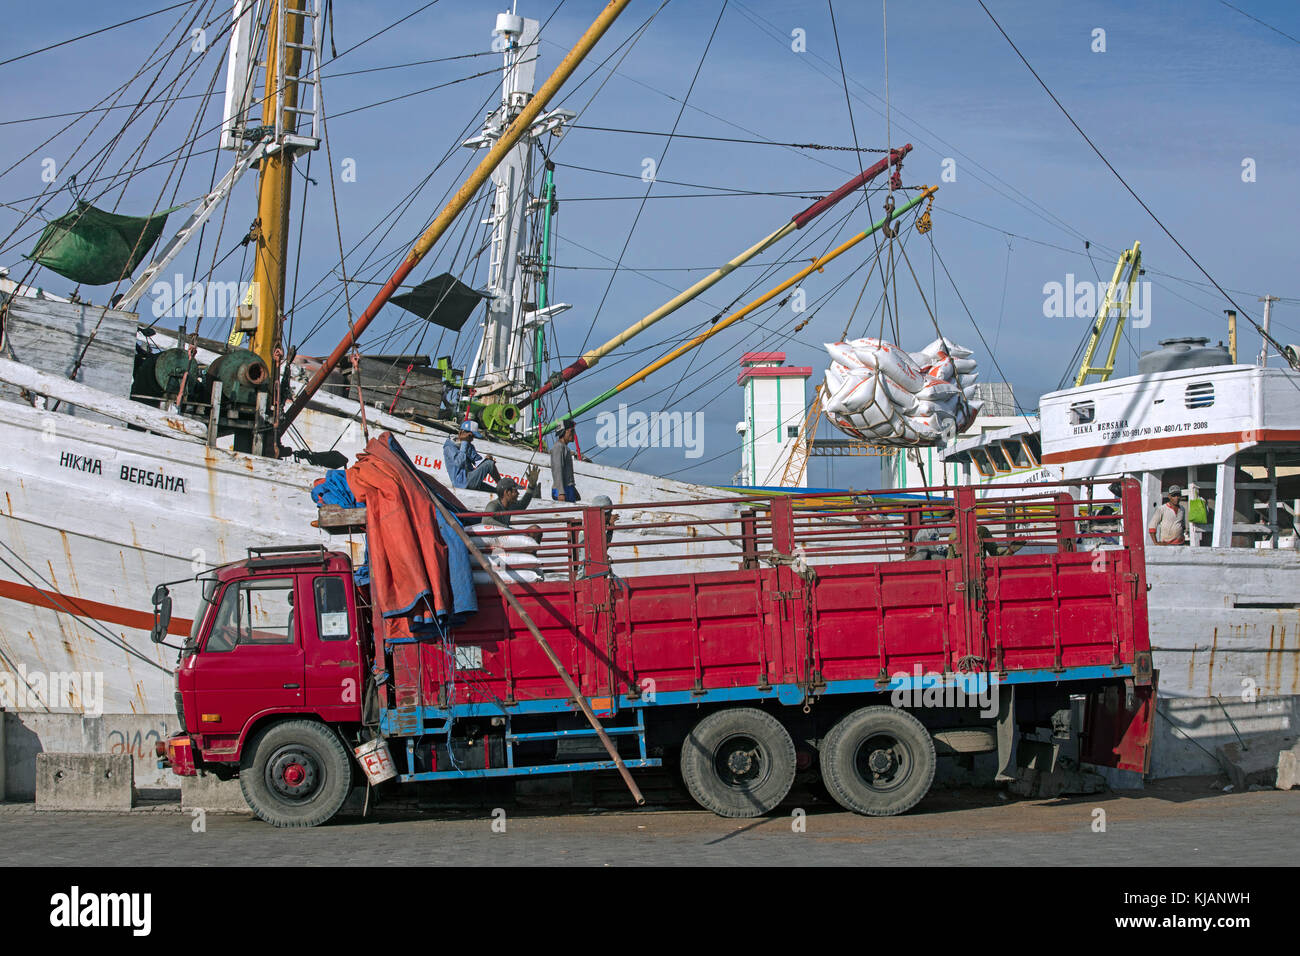 Truck loading merchandise from wooden pinisi / phinisi, traditional Indonesian cargo ship in the harbour of Semarang, Central Java, Indonesia Stock Photo